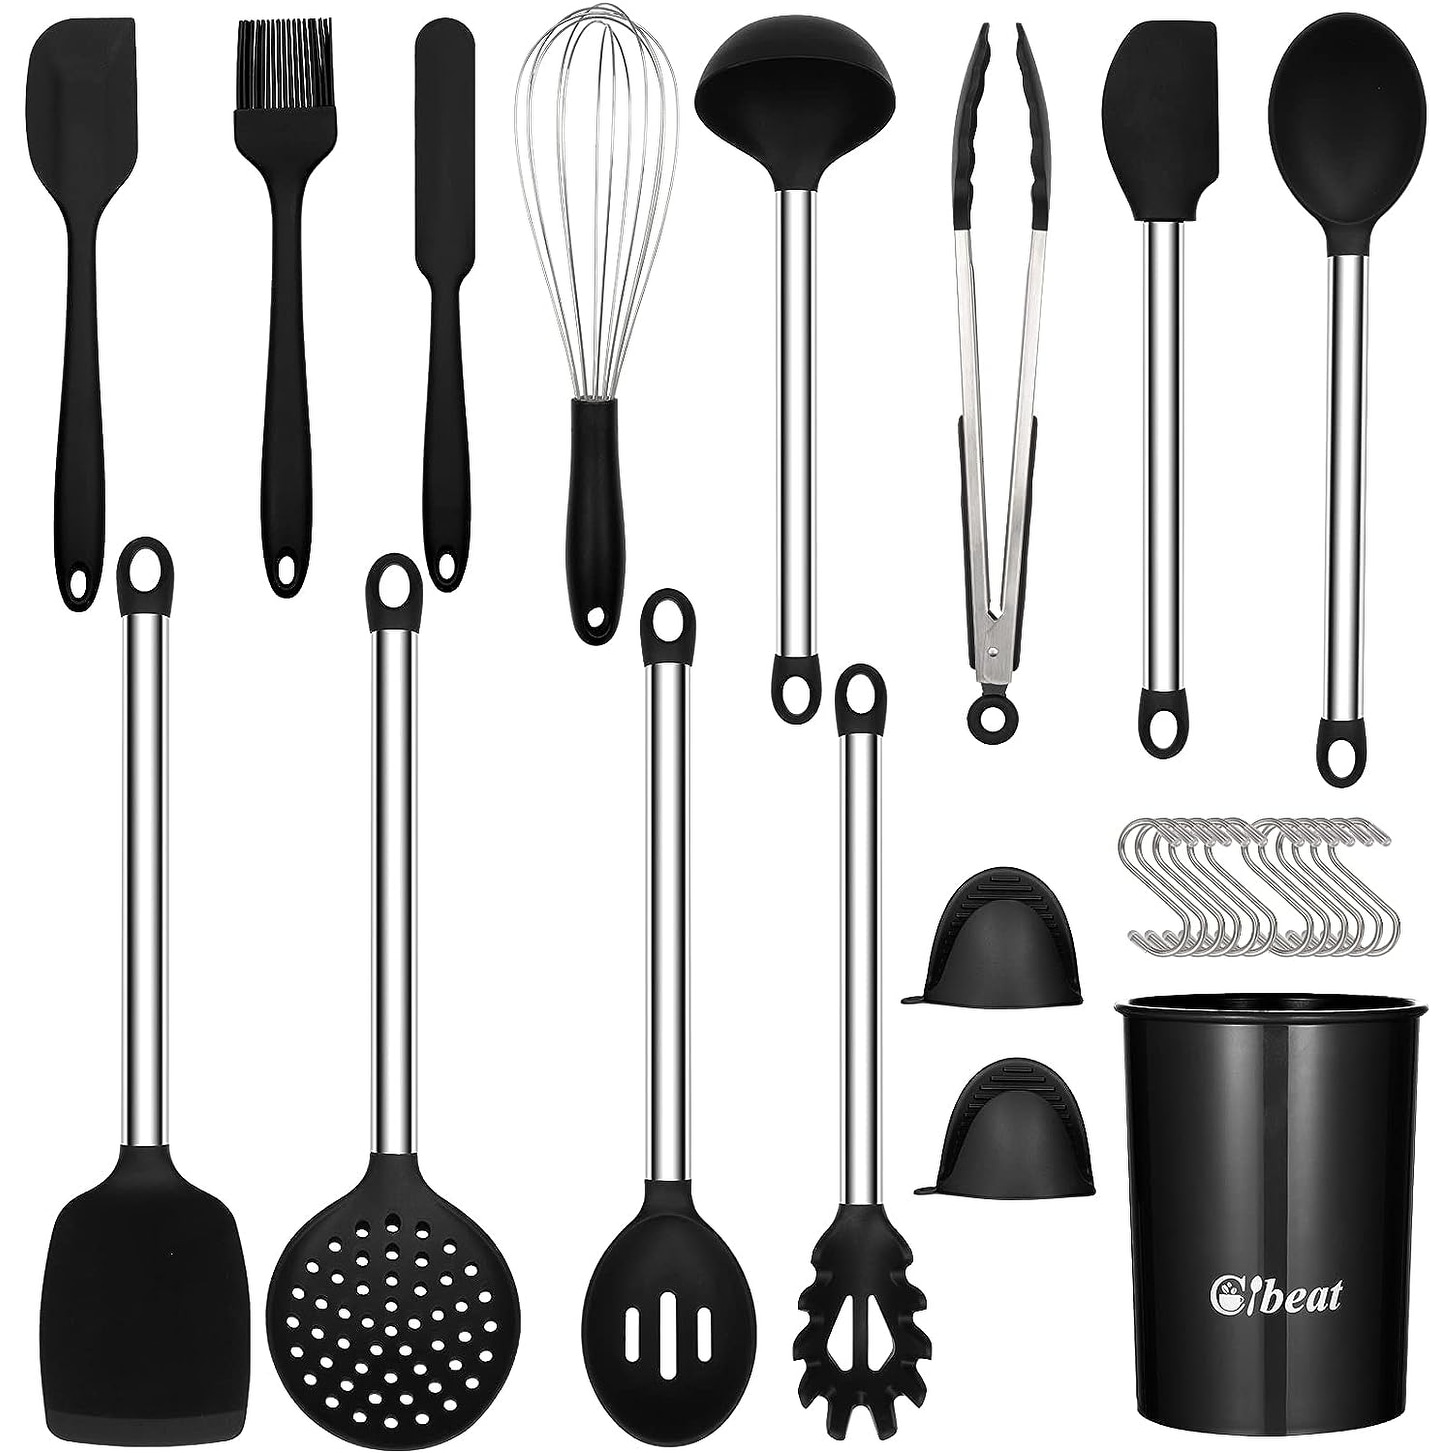 https://ak1.ostkcdn.com/images/products/is/images/direct/2264f19a19daf47849538d5db76c425f2033895c/Kitchen-Utensils-Set-with-Holder%2C-Silicone-Cooking-Utensils-Gadget.jpg